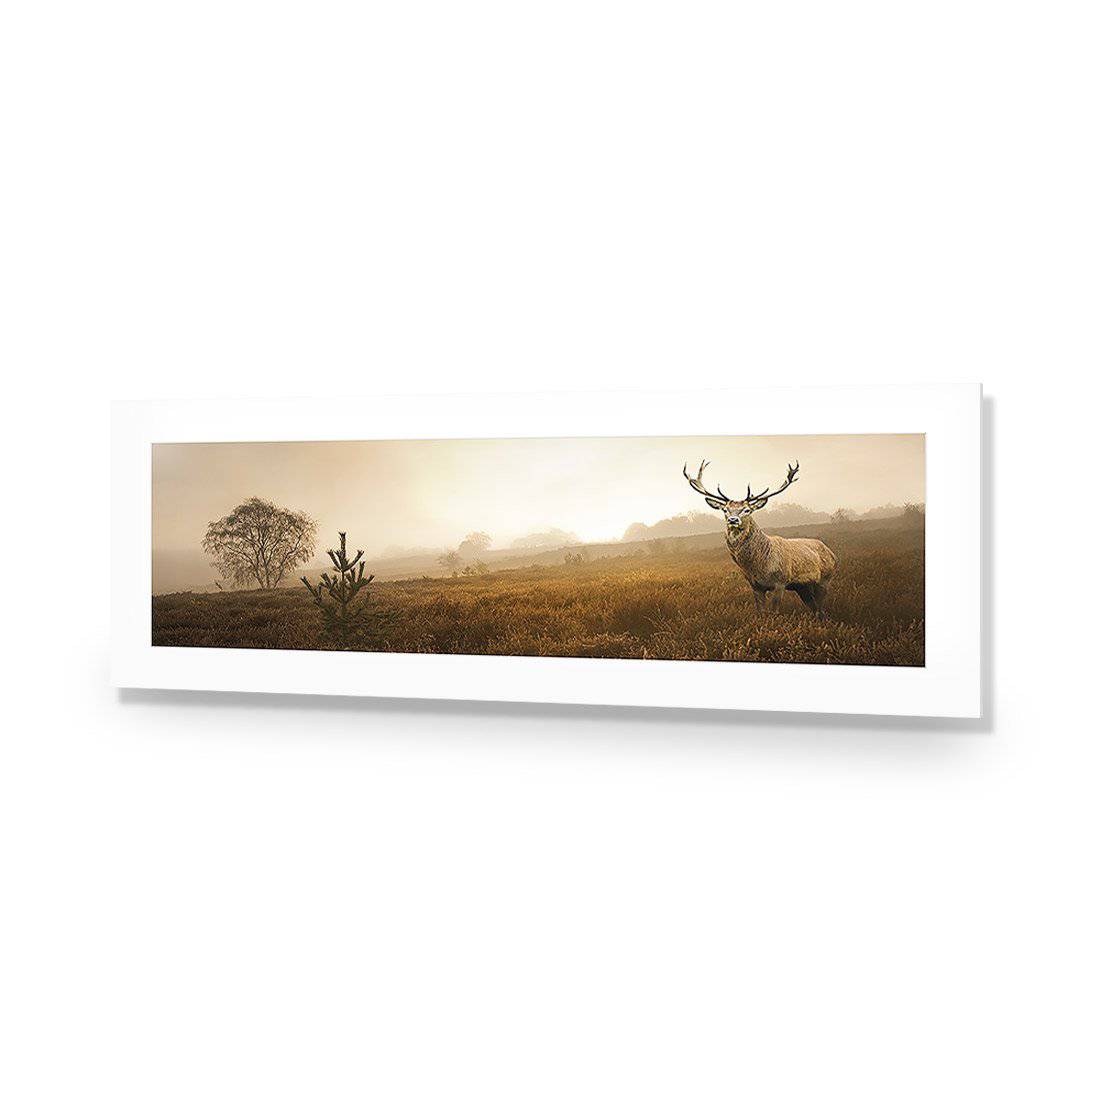 Morning Stag, Long-Acrylic-Wall Art Design-With Border-Acrylic - No Frame-60x20cm-Wall Art Designs